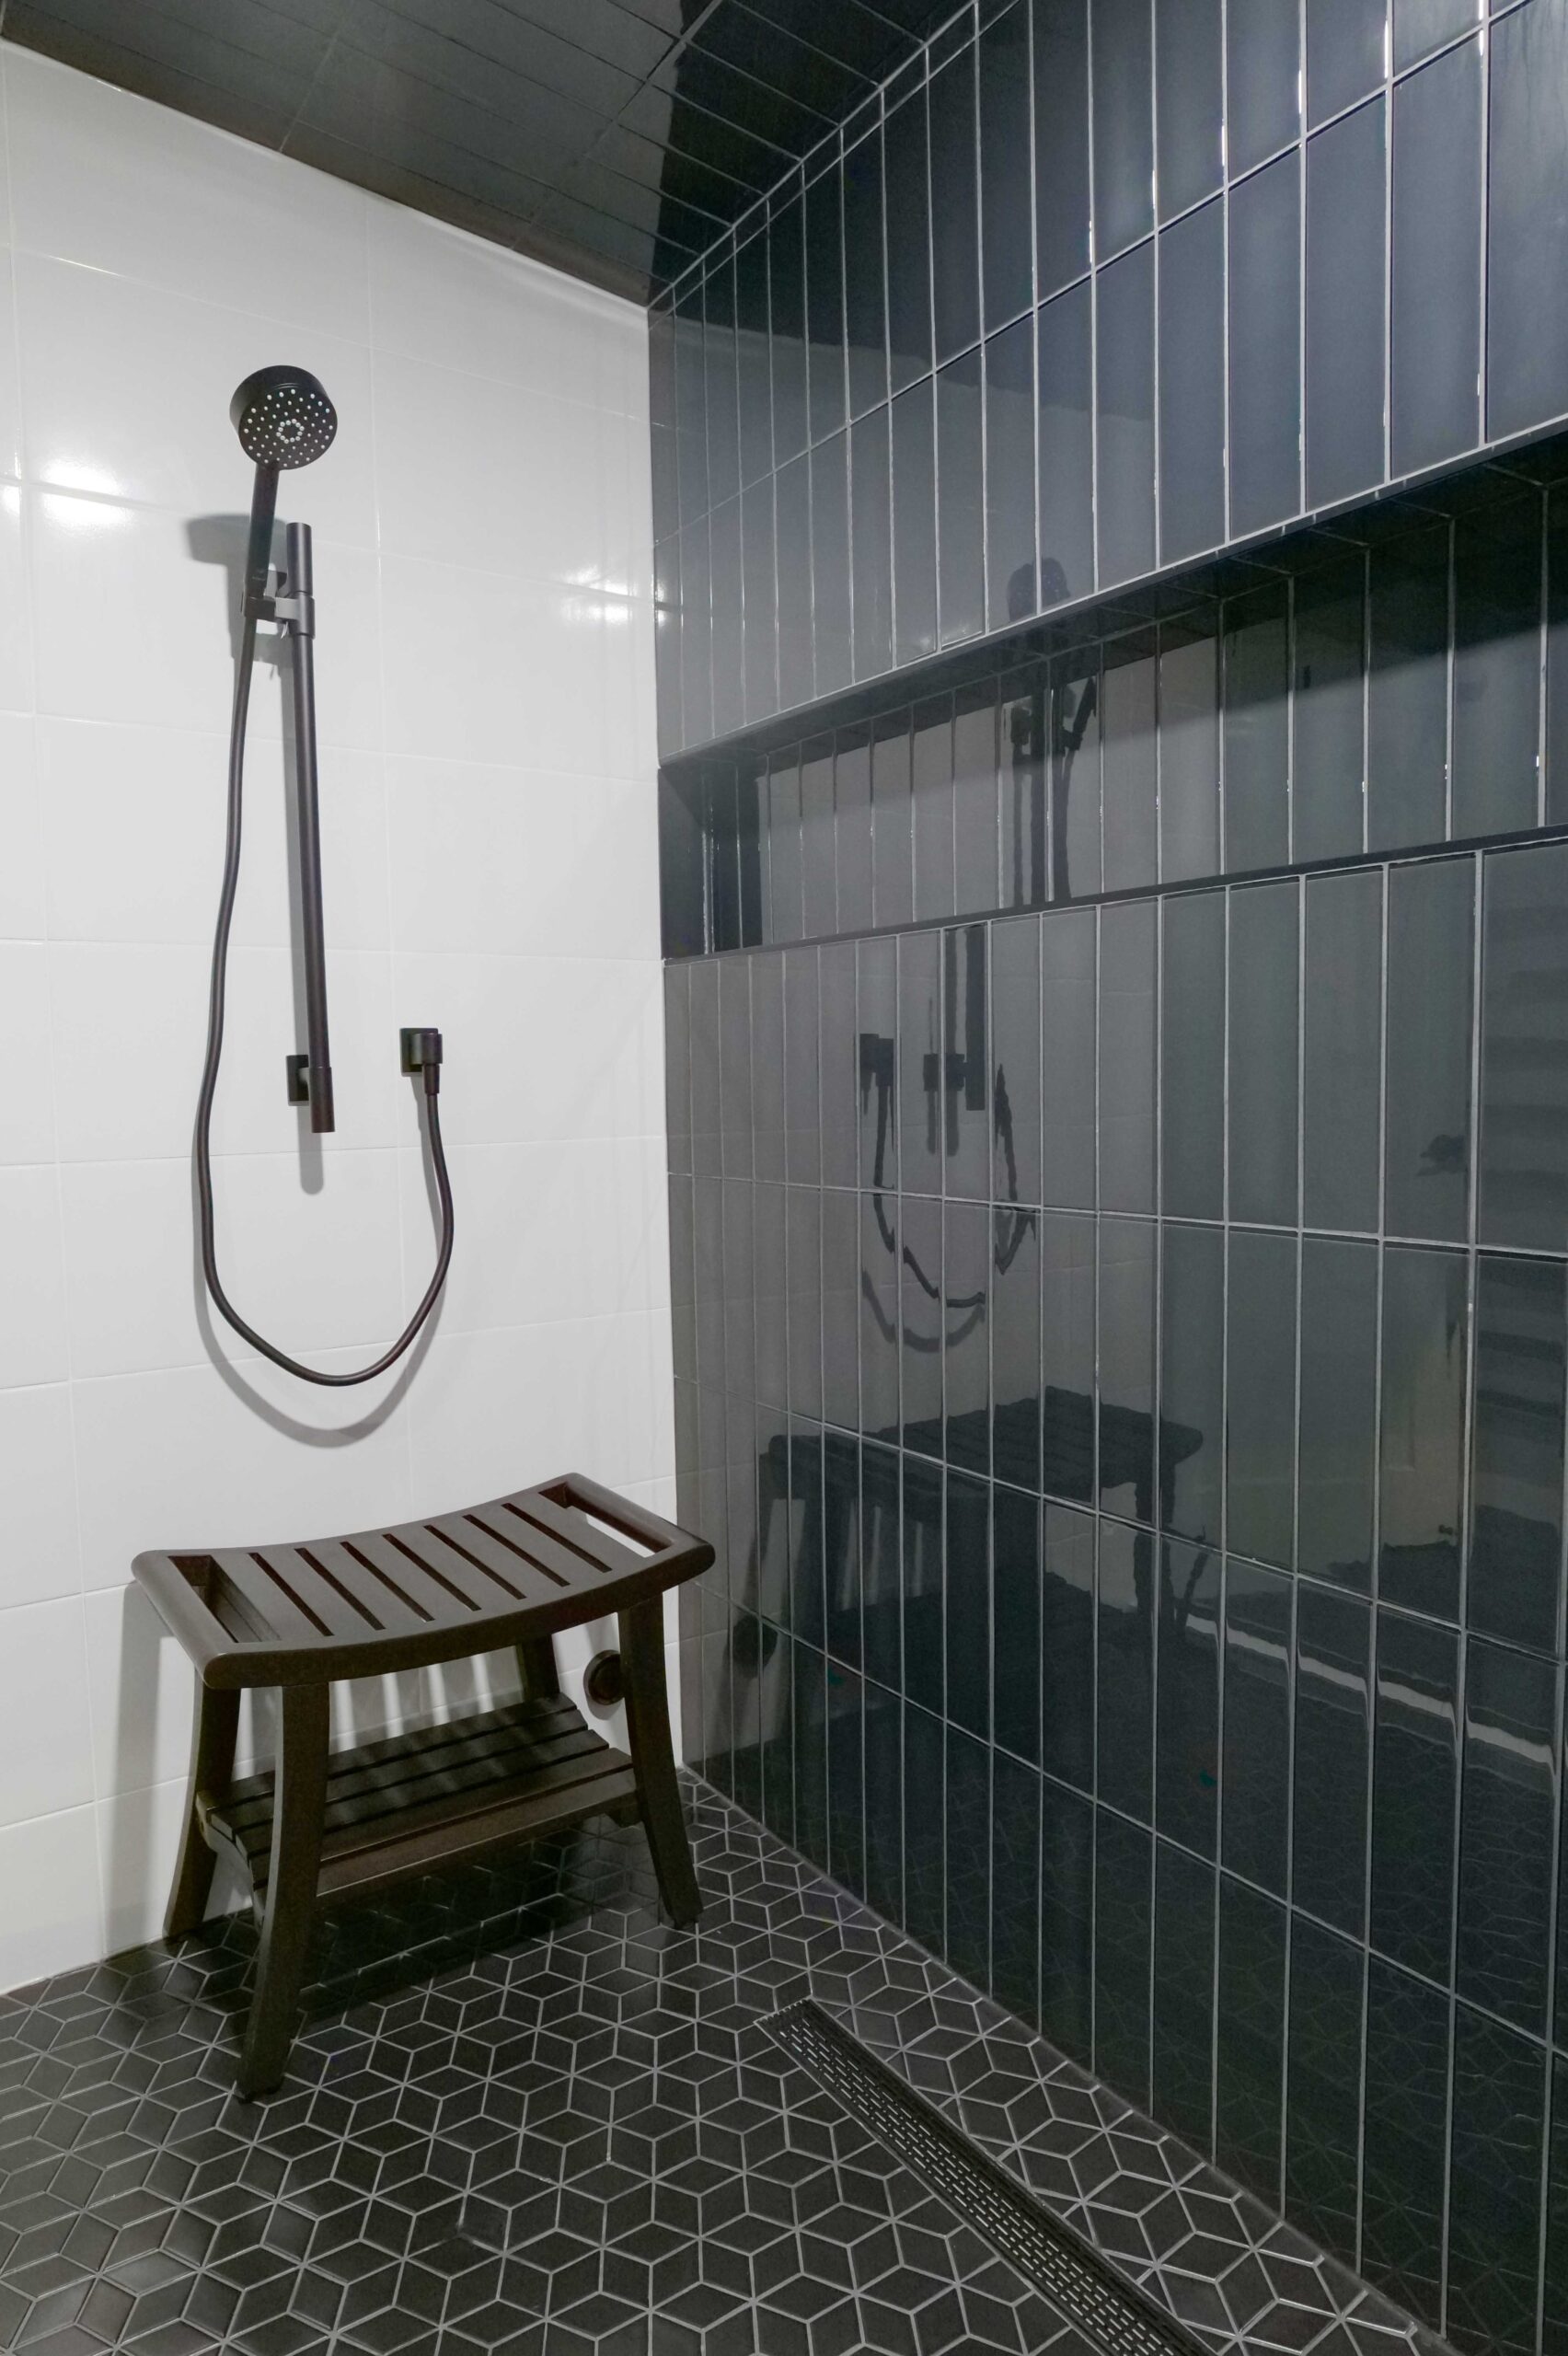 Orchard Lake remodel: A black and white tiled shower with a wooden bench.